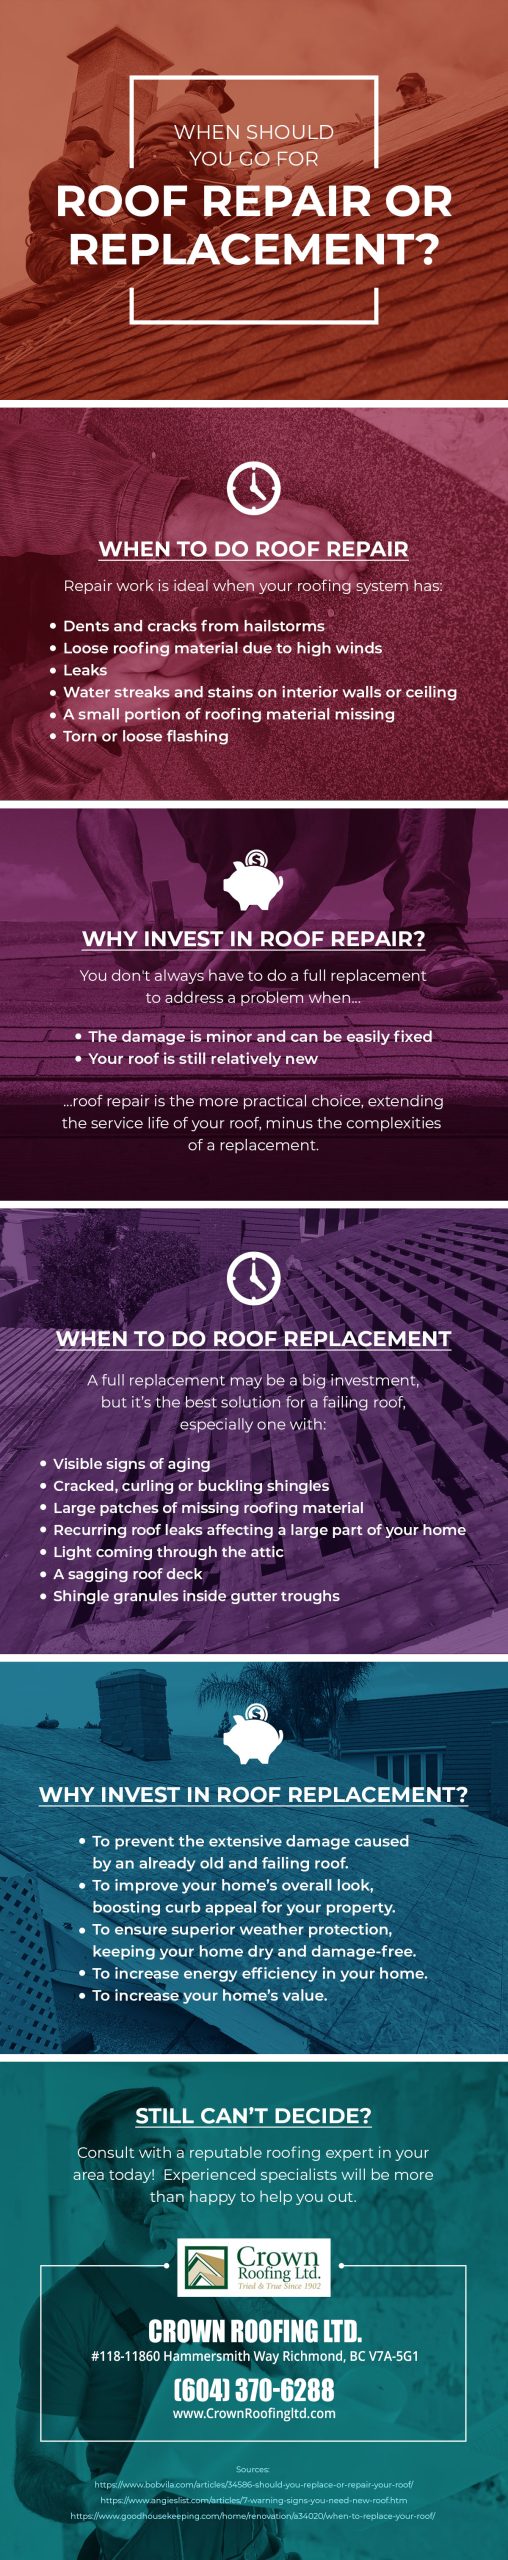 When Should You Go For Roof Repair or Replacement